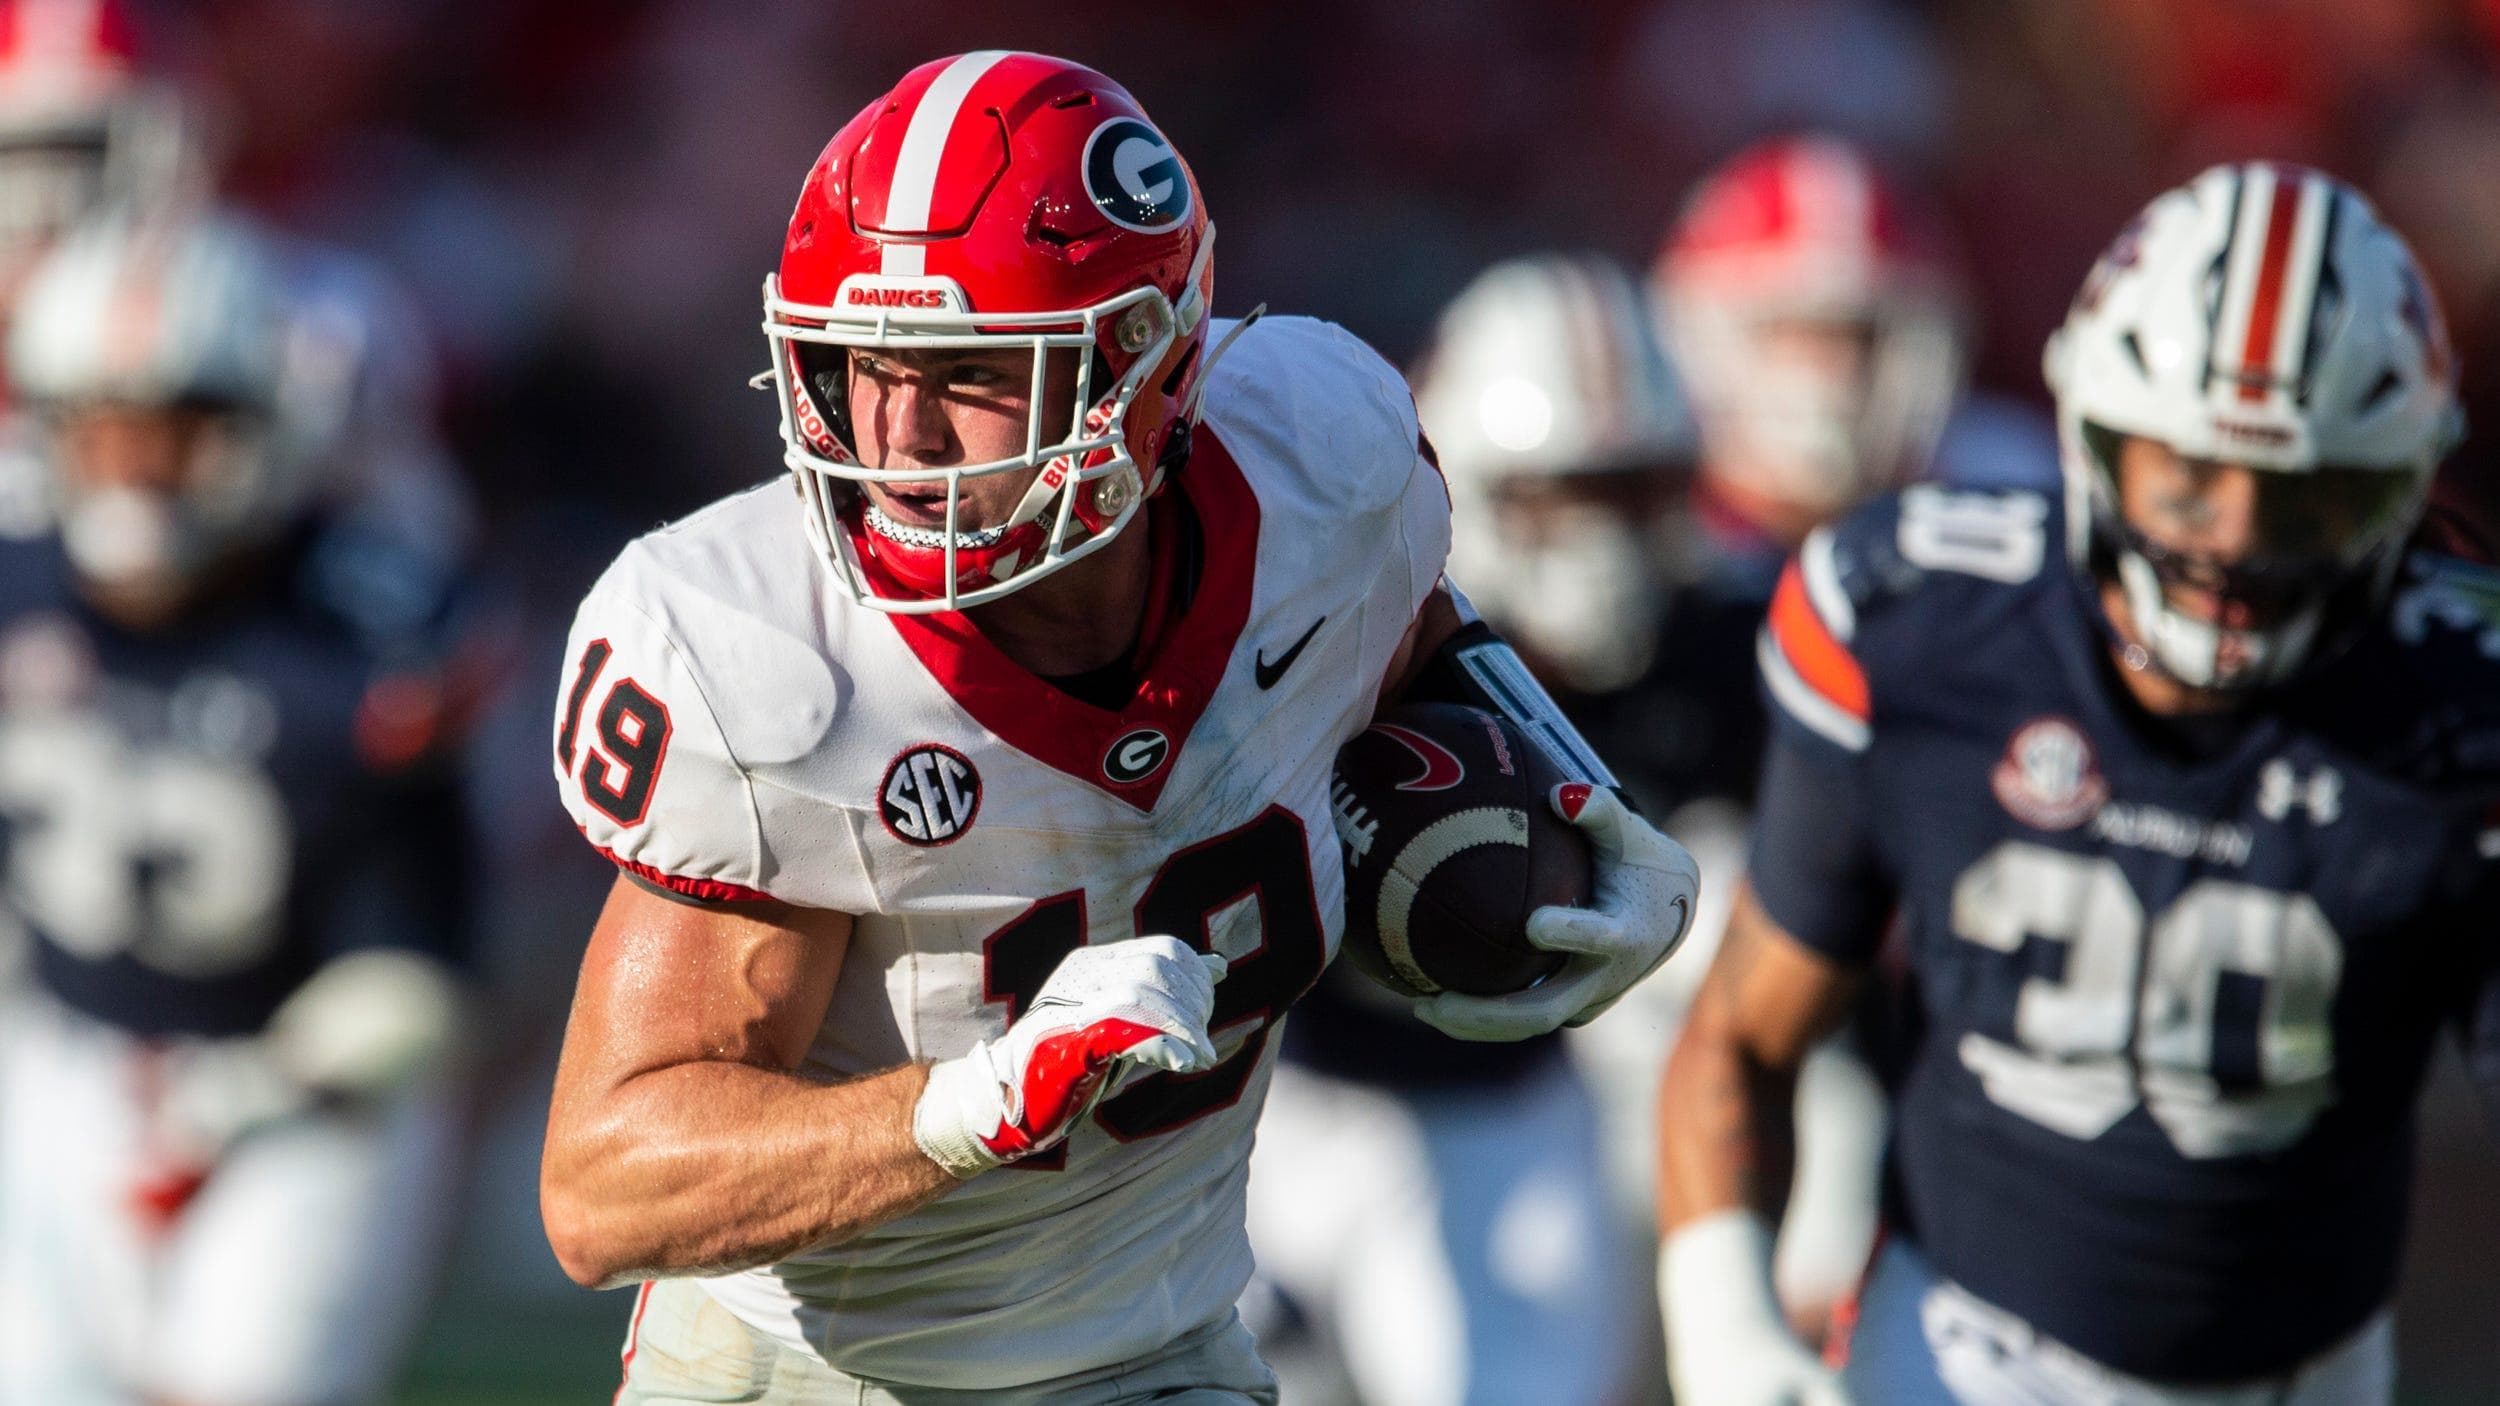 Brock Bowers Selected 13th Overall by the Las Vegas Raiders